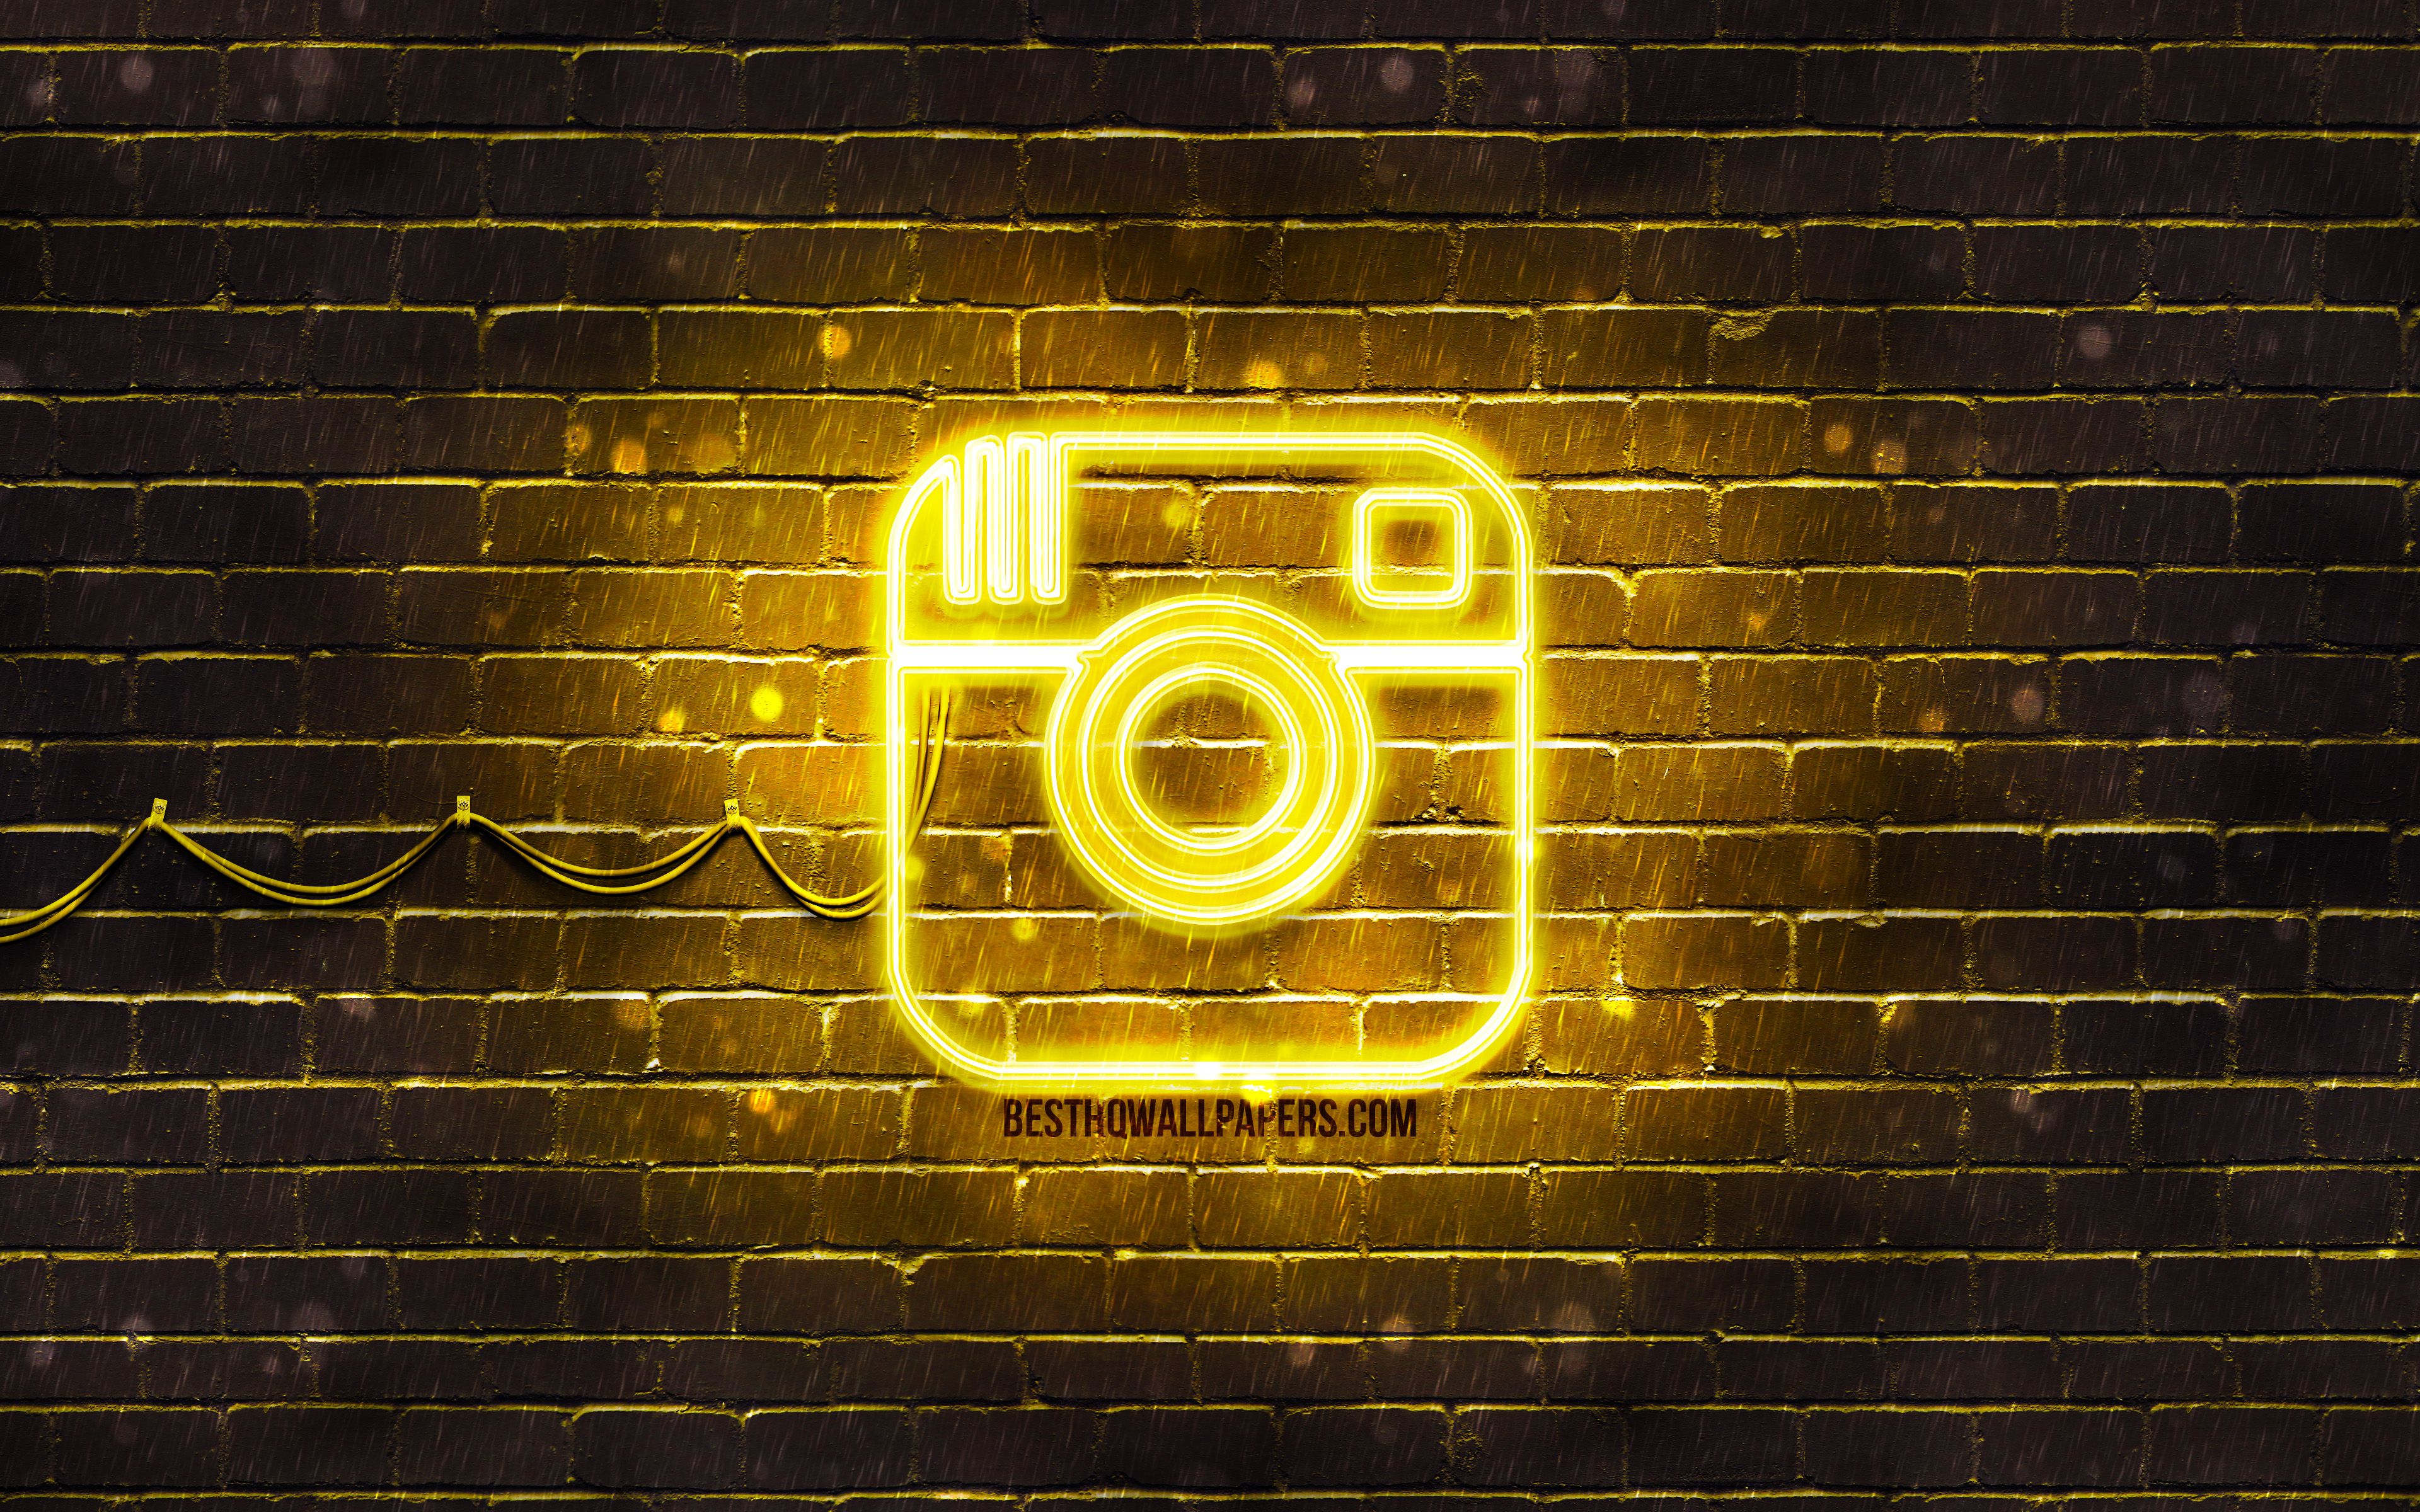 Download wallpaper Instagram yellow logo, 4k, yellow brickwall, Instagram logo, brands, Instagram neon logo, Instagram for desktop with resolution 3840x2400. High Quality HD picture wallpaper